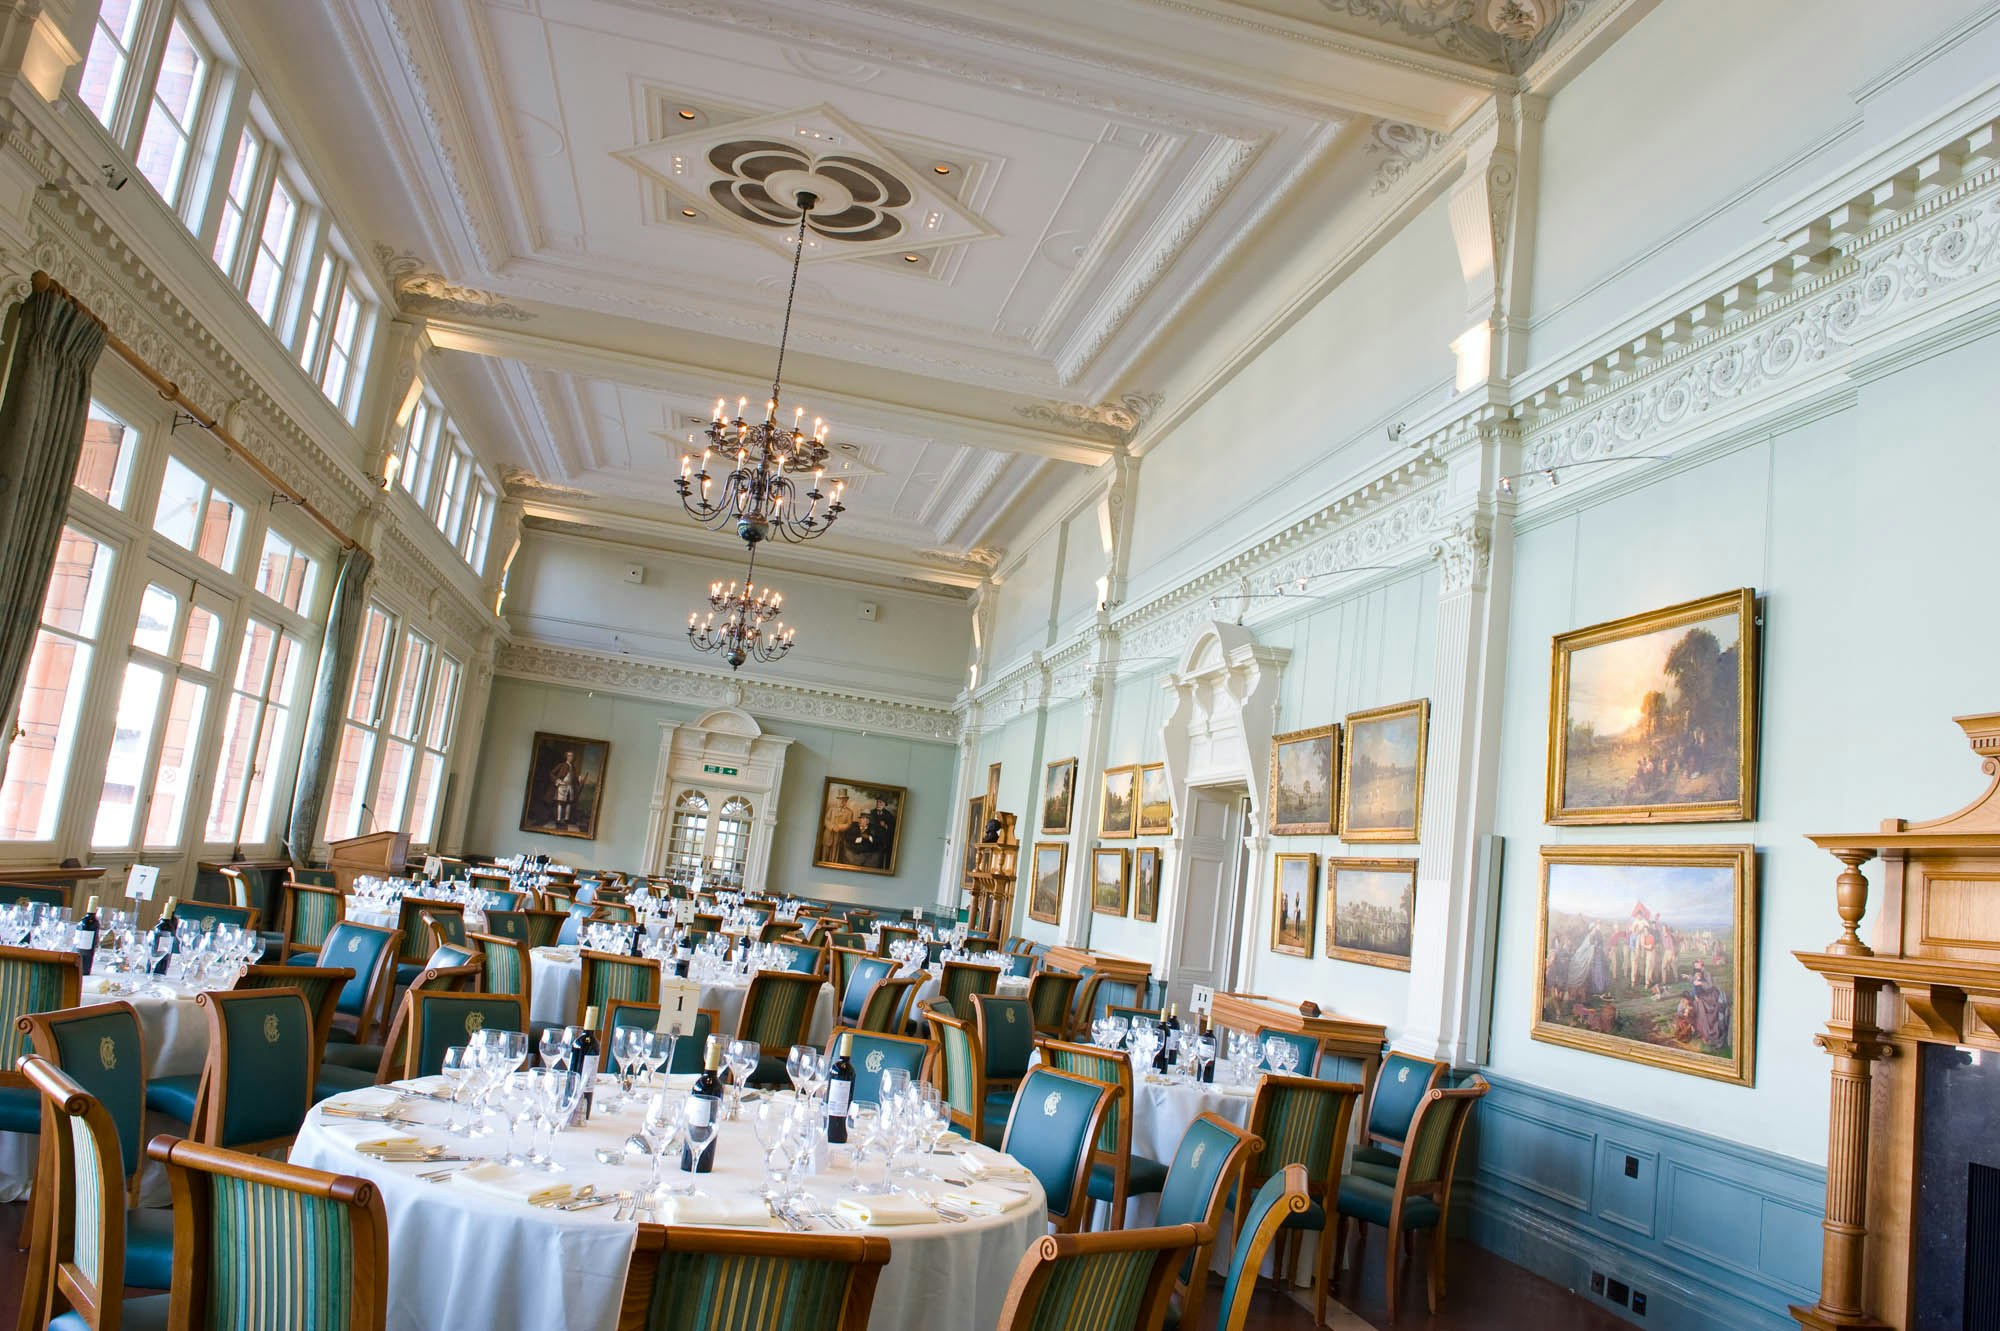 Team Away Day Ideas in London - Lord's Cricket Ground - Events in Long Room - Banner